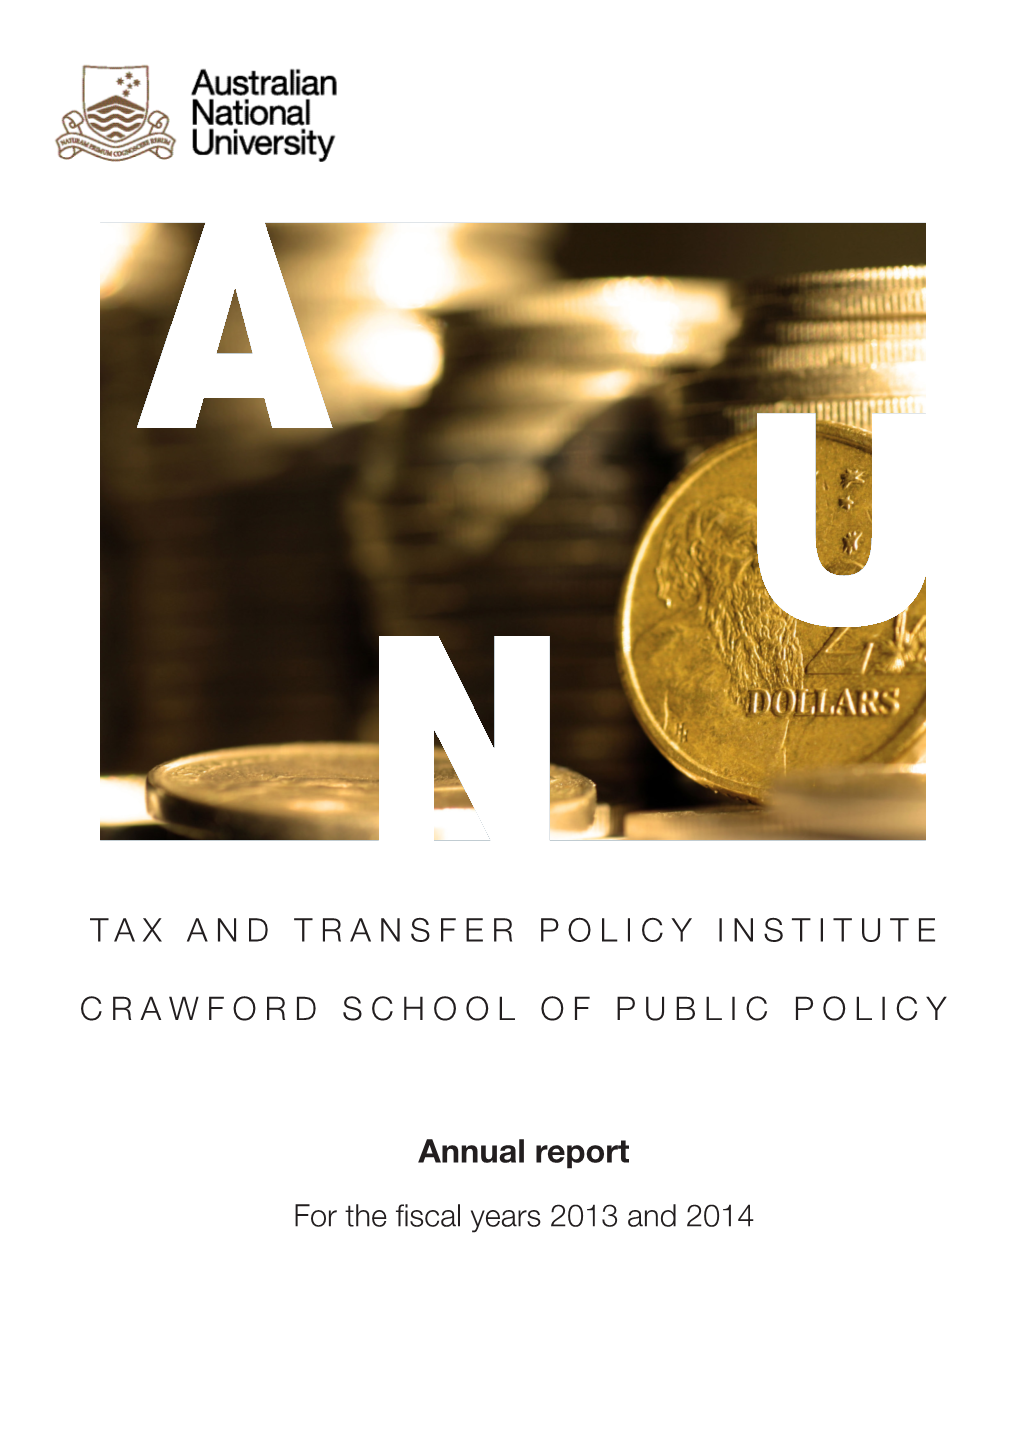 2013 and 2014 TAX and TRANSFER POLICY INSTITUTE